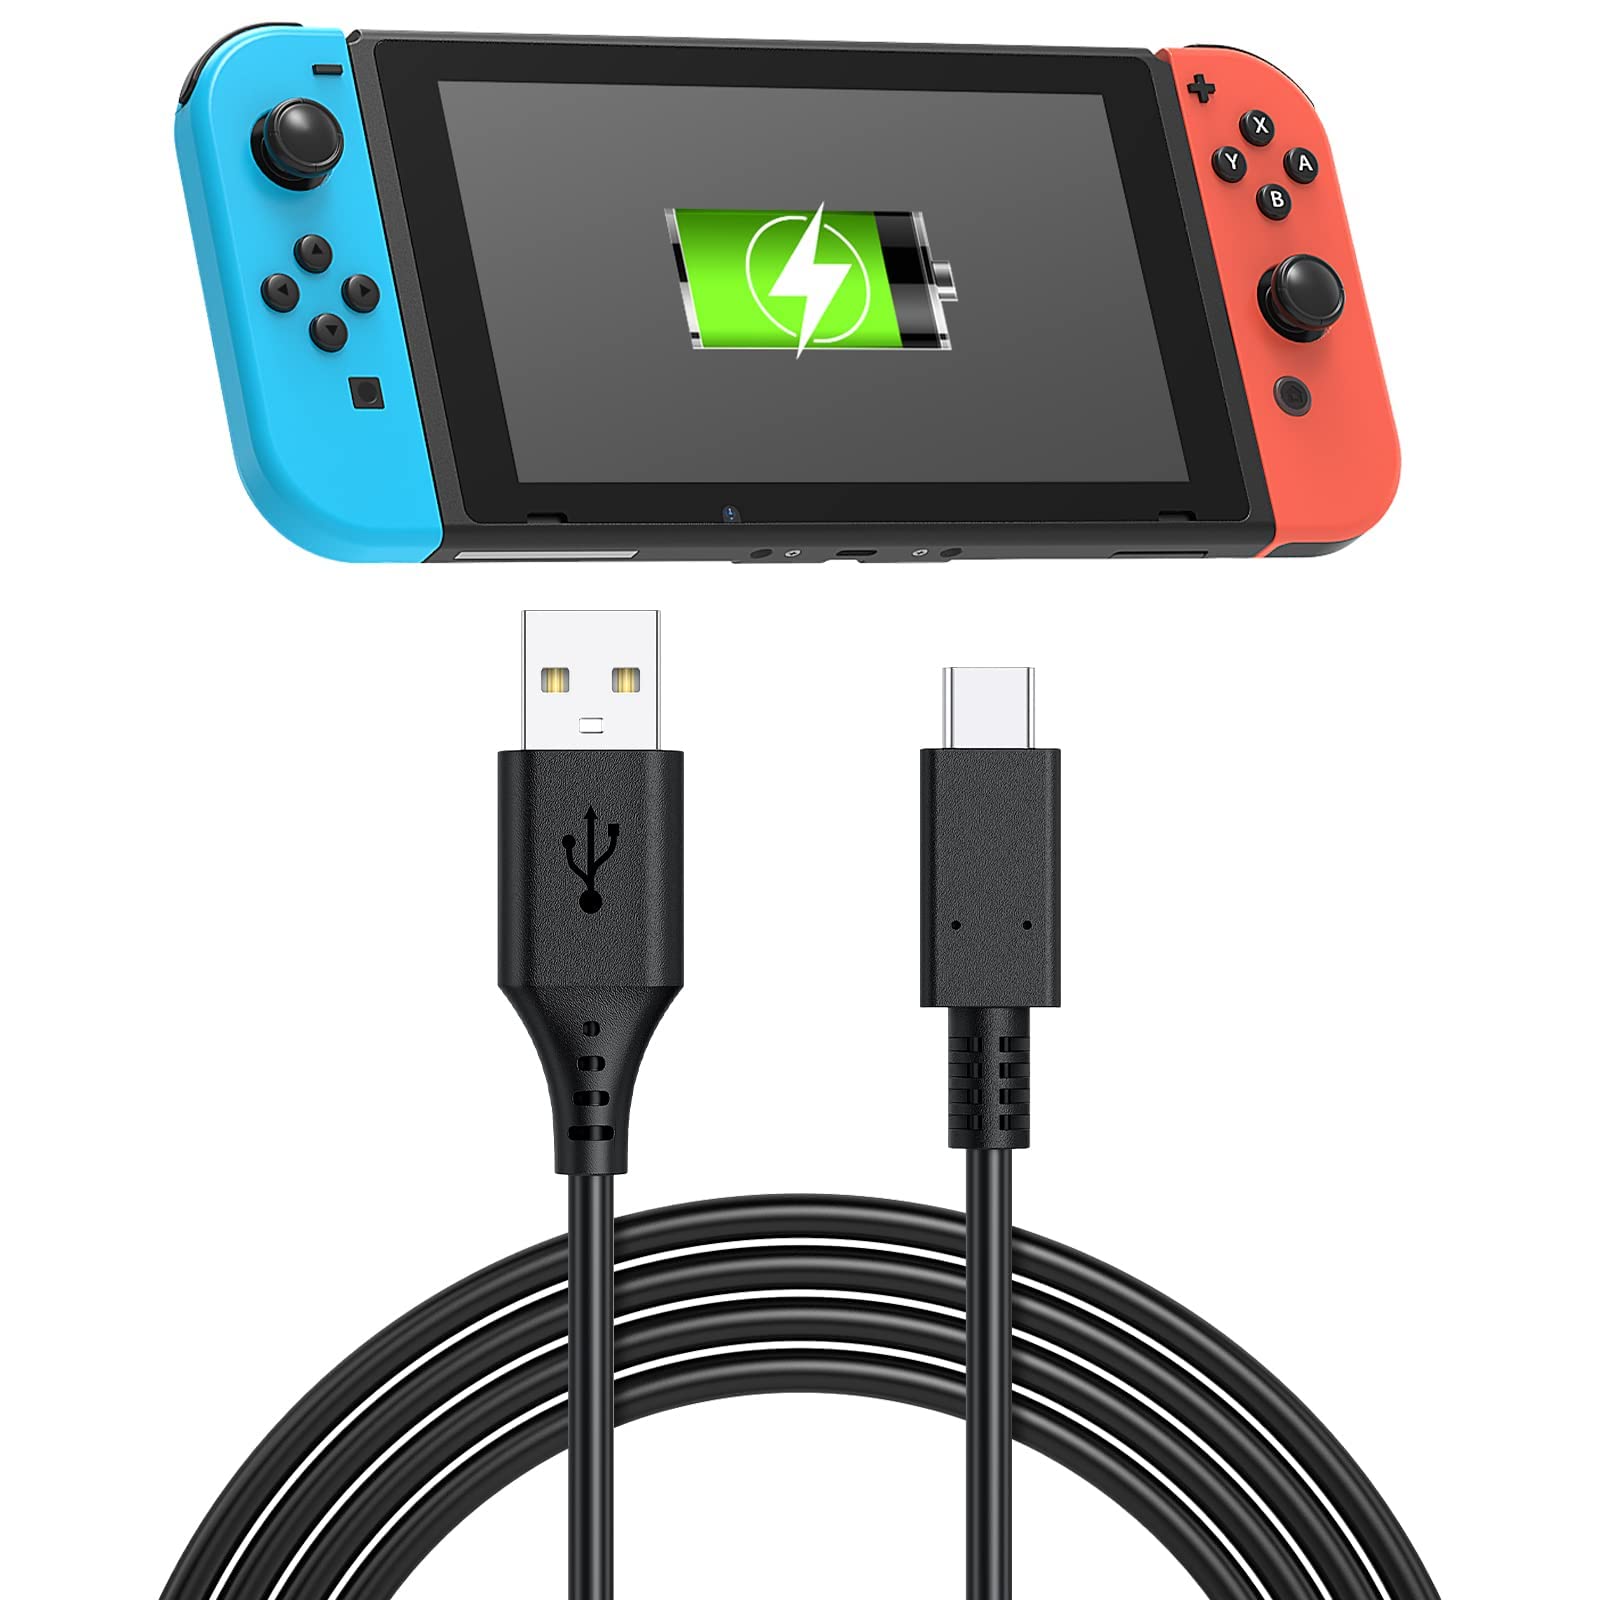 Nintendo Switch with charging cable